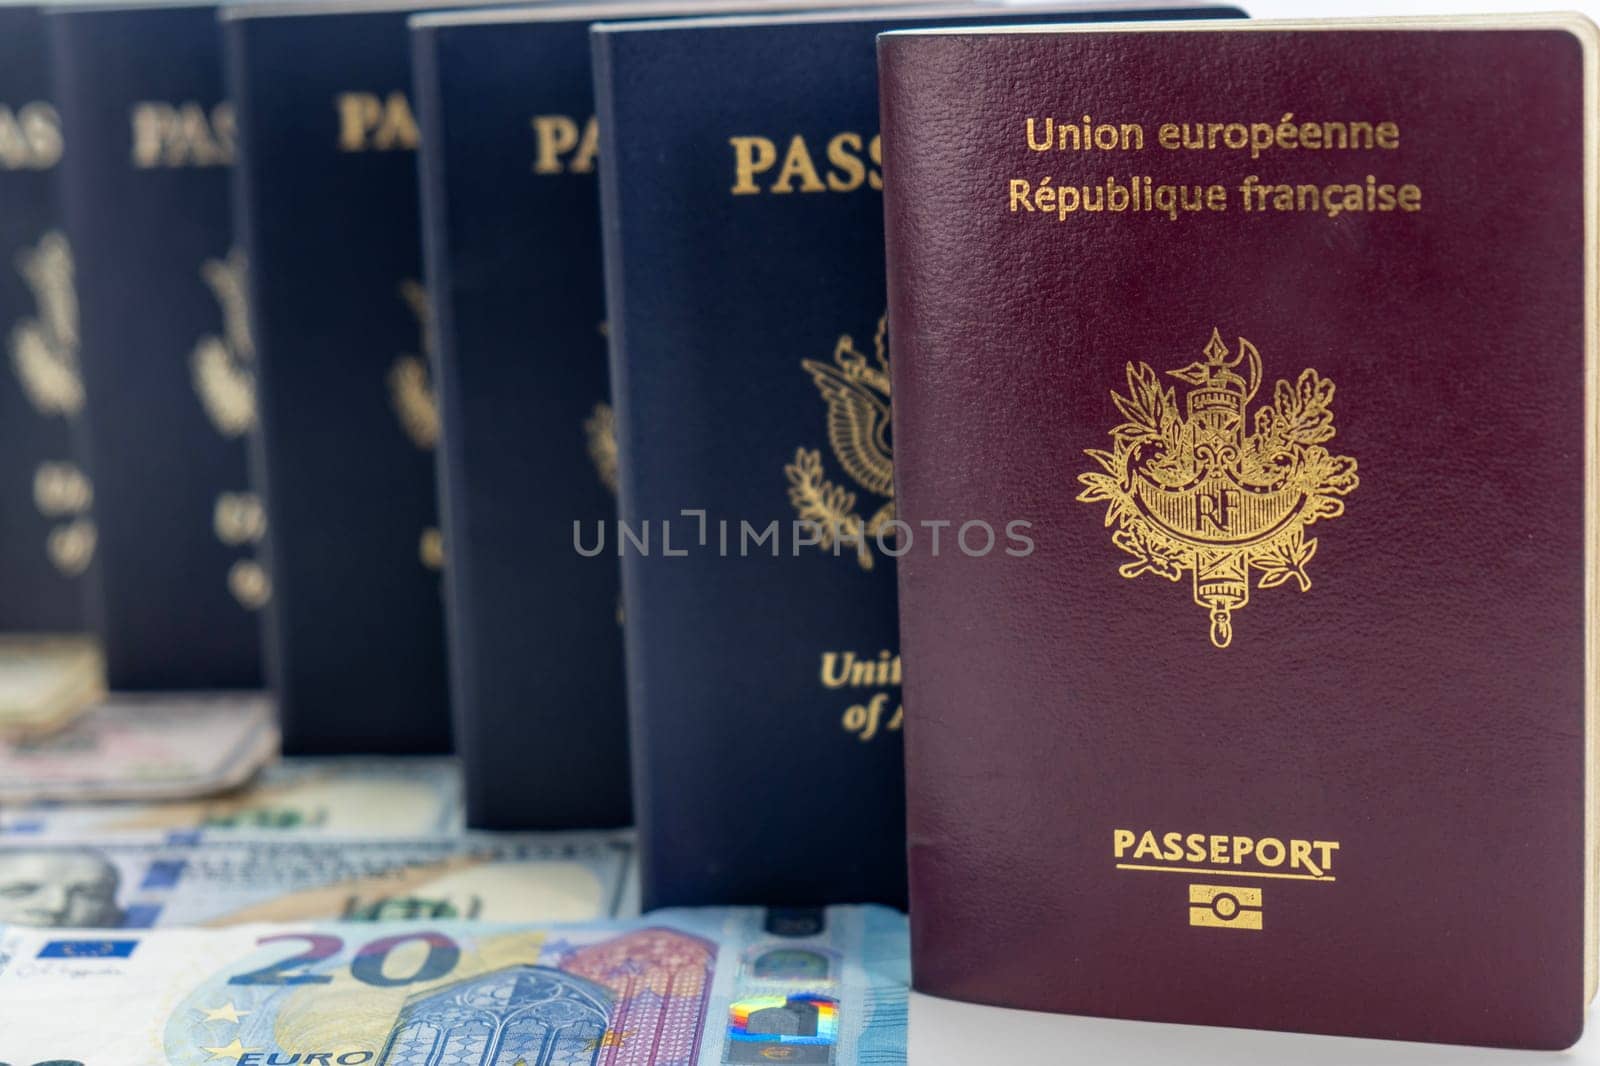 United States and France passports on currency transparent background, low camera angle by bRollGO